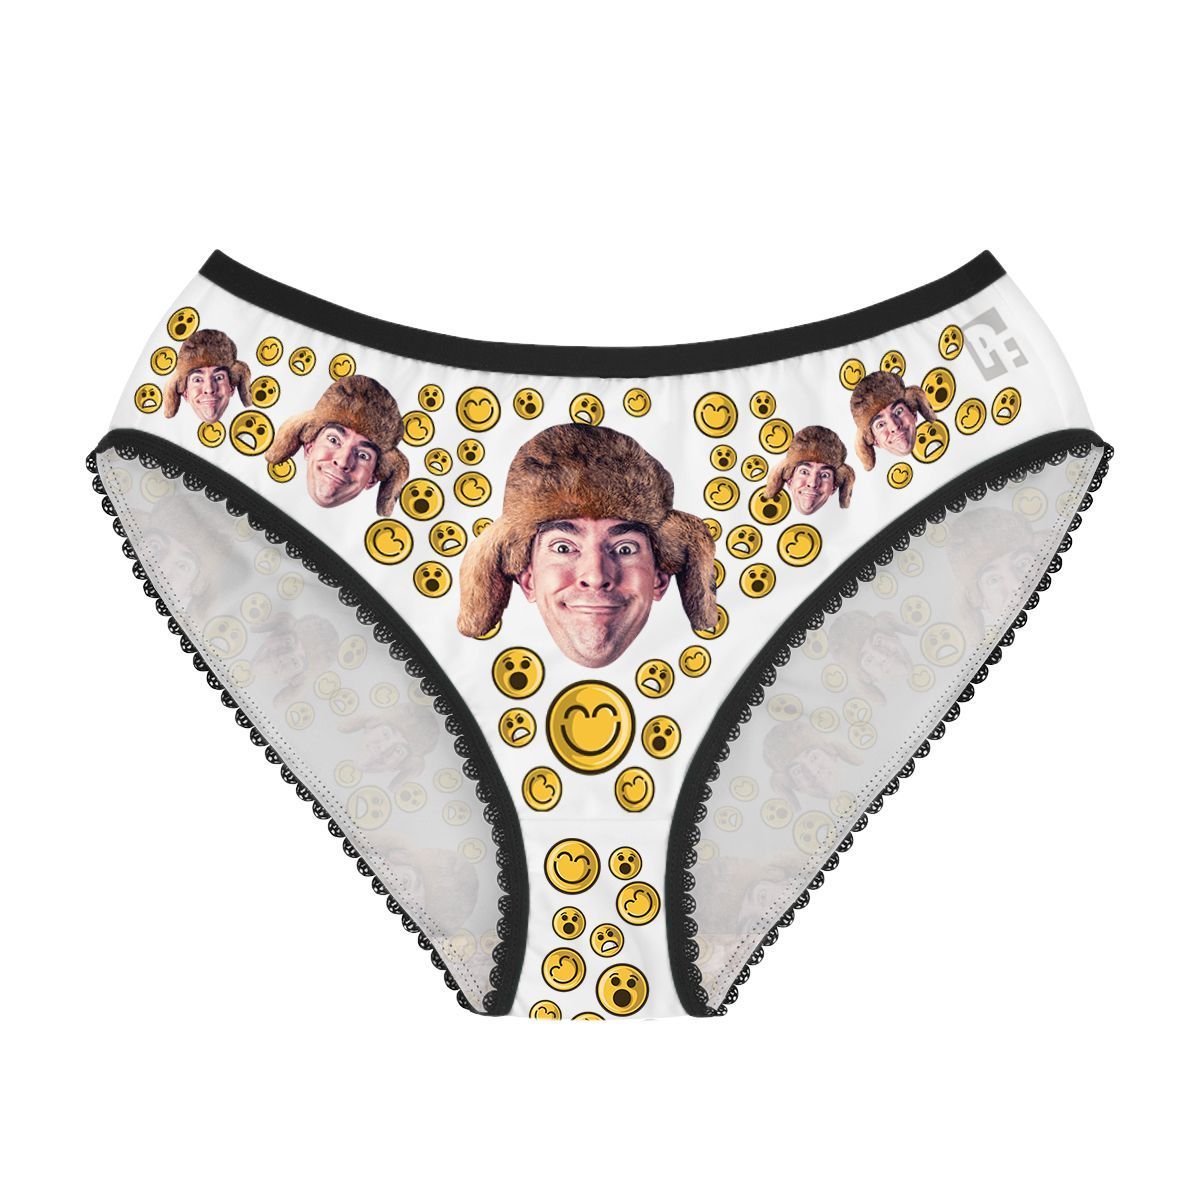 White Smiles women's underwear briefs personalized with photo printed on them